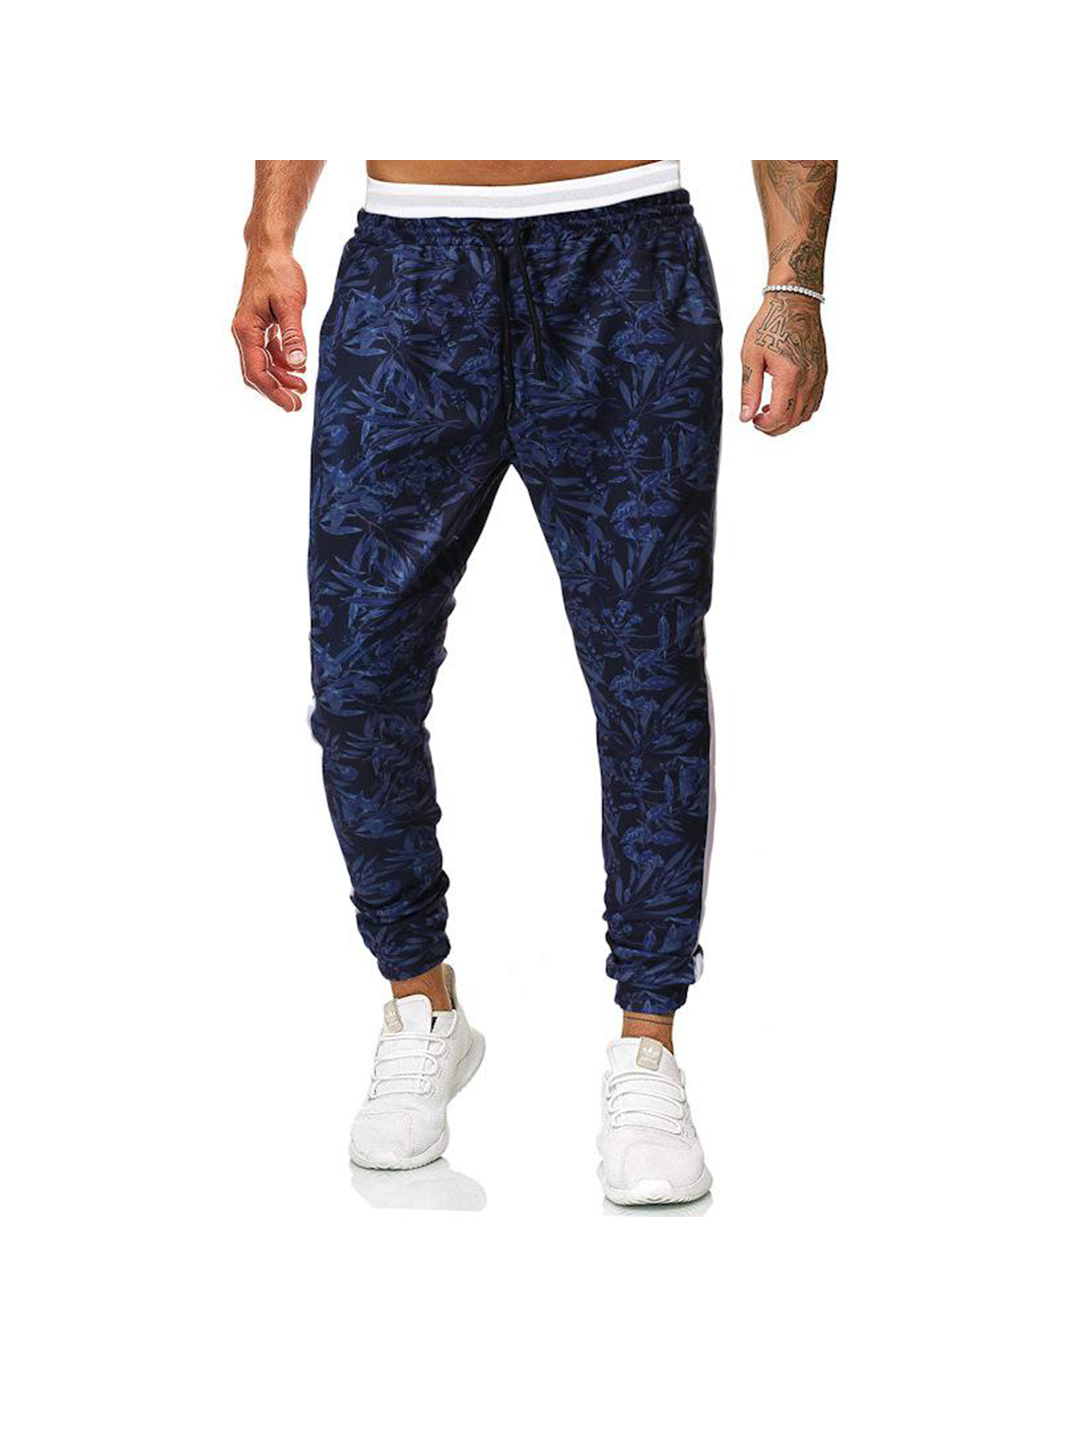 Nelson 3D Floral Printing Casual Jogger